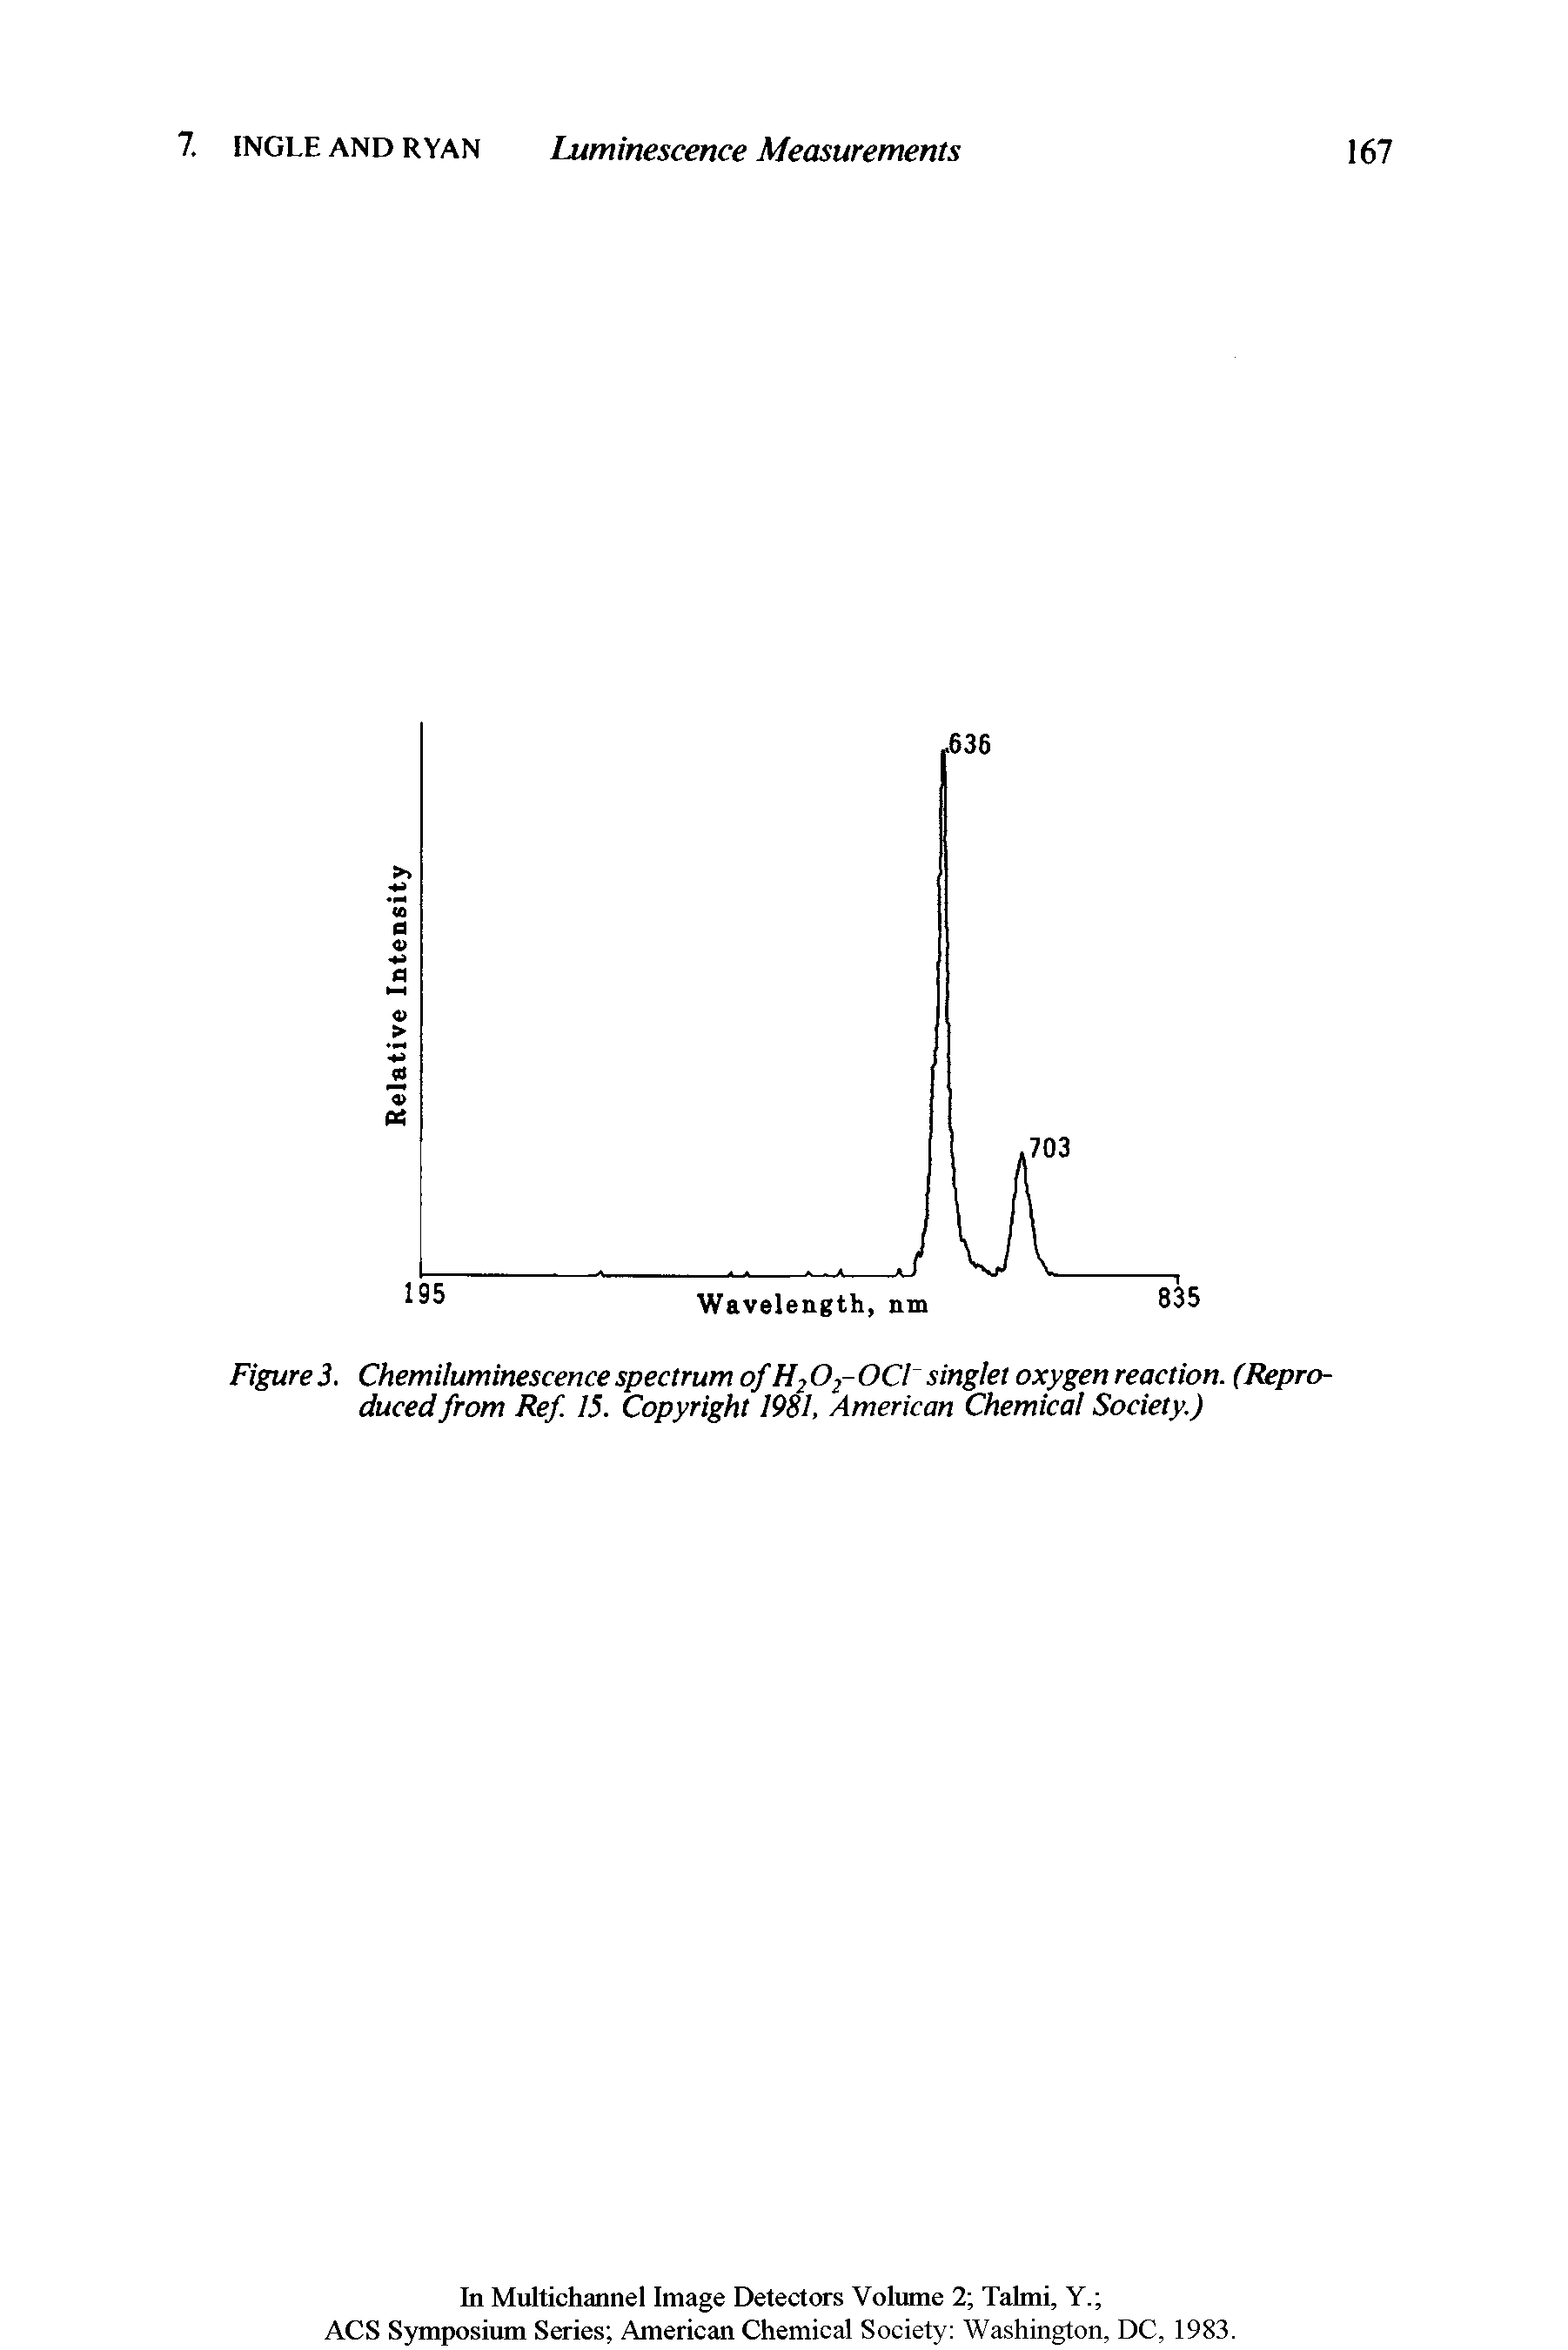 Figure3. Chemiluminescence spectrum of H202-0CI singlet oxygen reaction. (Reproduced from Ref. 15. Copyright 1981, American Chemical Society.)...